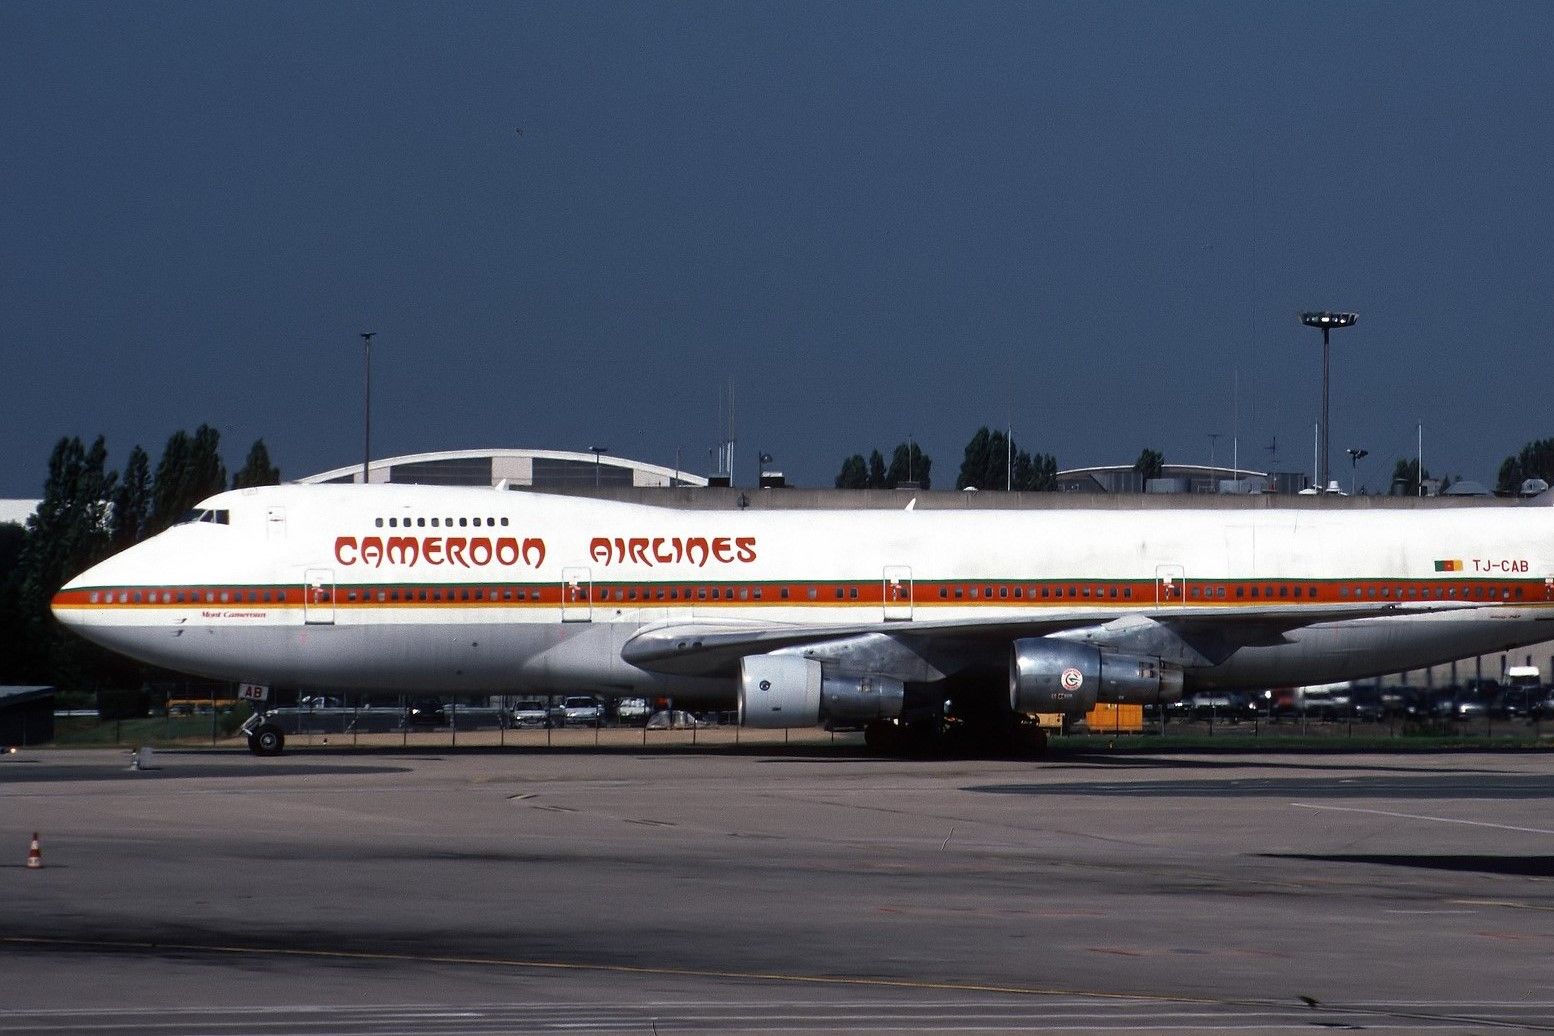 A Cameroon Airlines Boeing 747 on an airport apron.